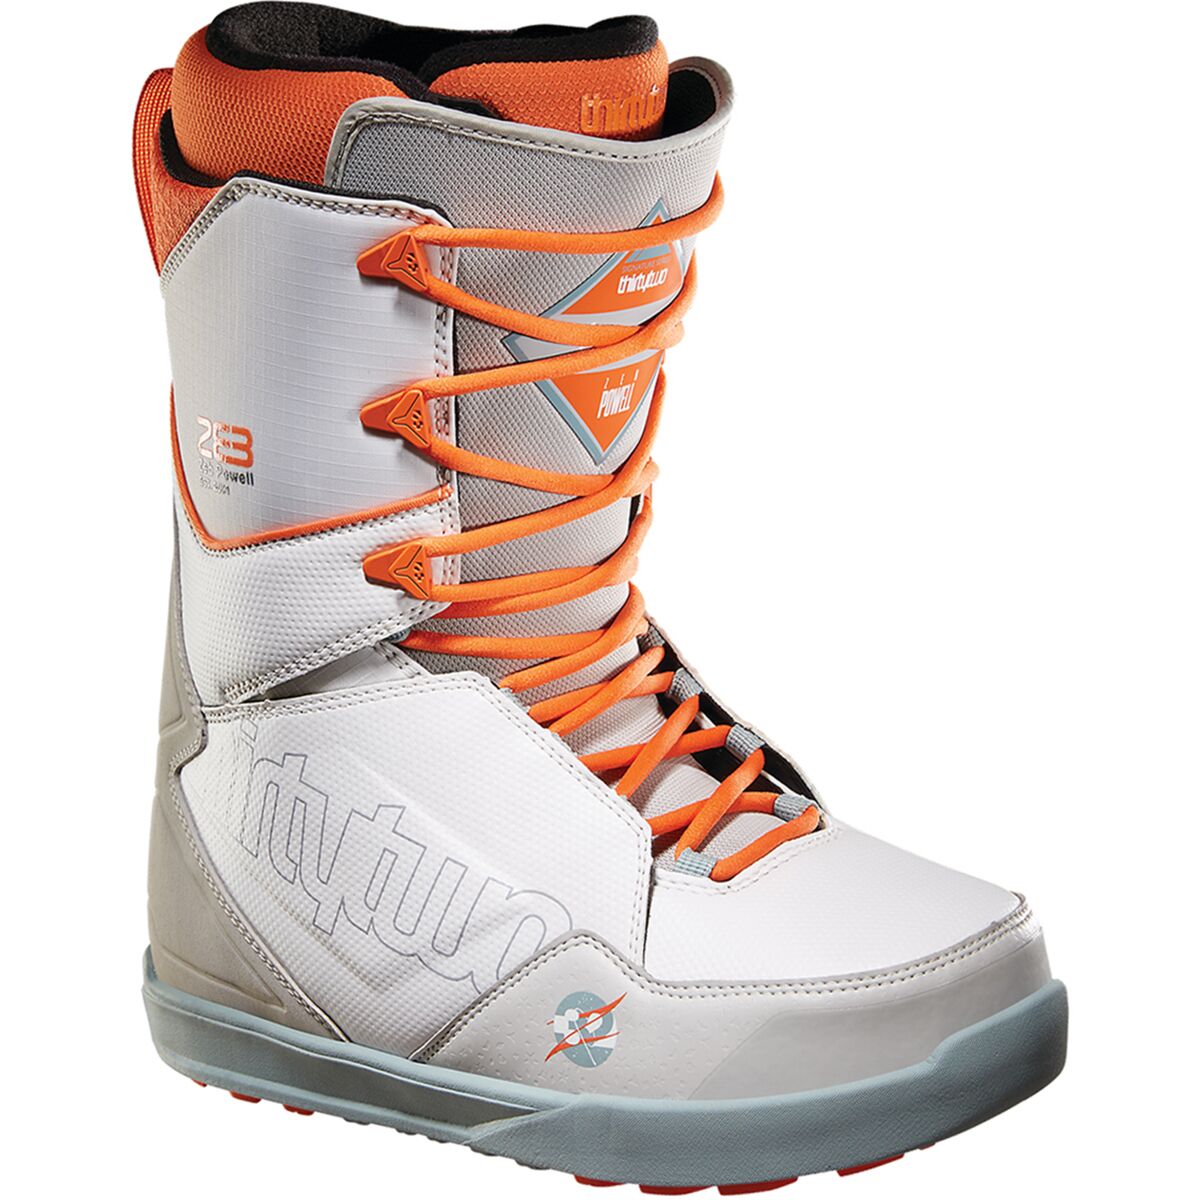 ThirtyTwo Lashed Powell Snowboard Boot - 2023 - Men's